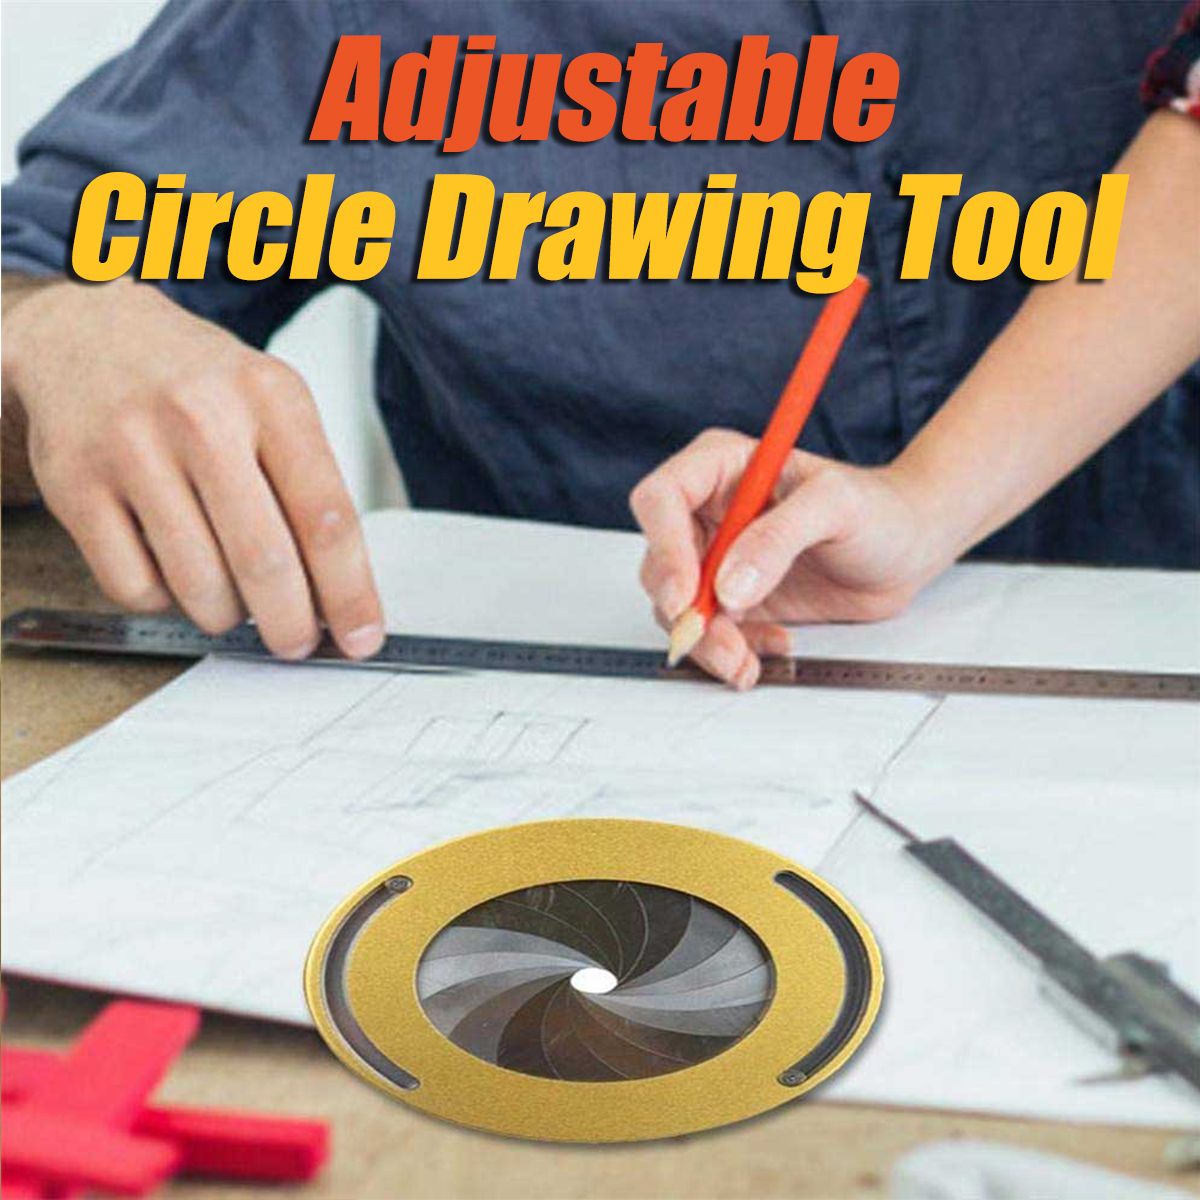 125CM-Adjustable-Circle-Drawing-Tool-Woodworking-Measuring-Angle-Ruler-Round-Tools-1639770